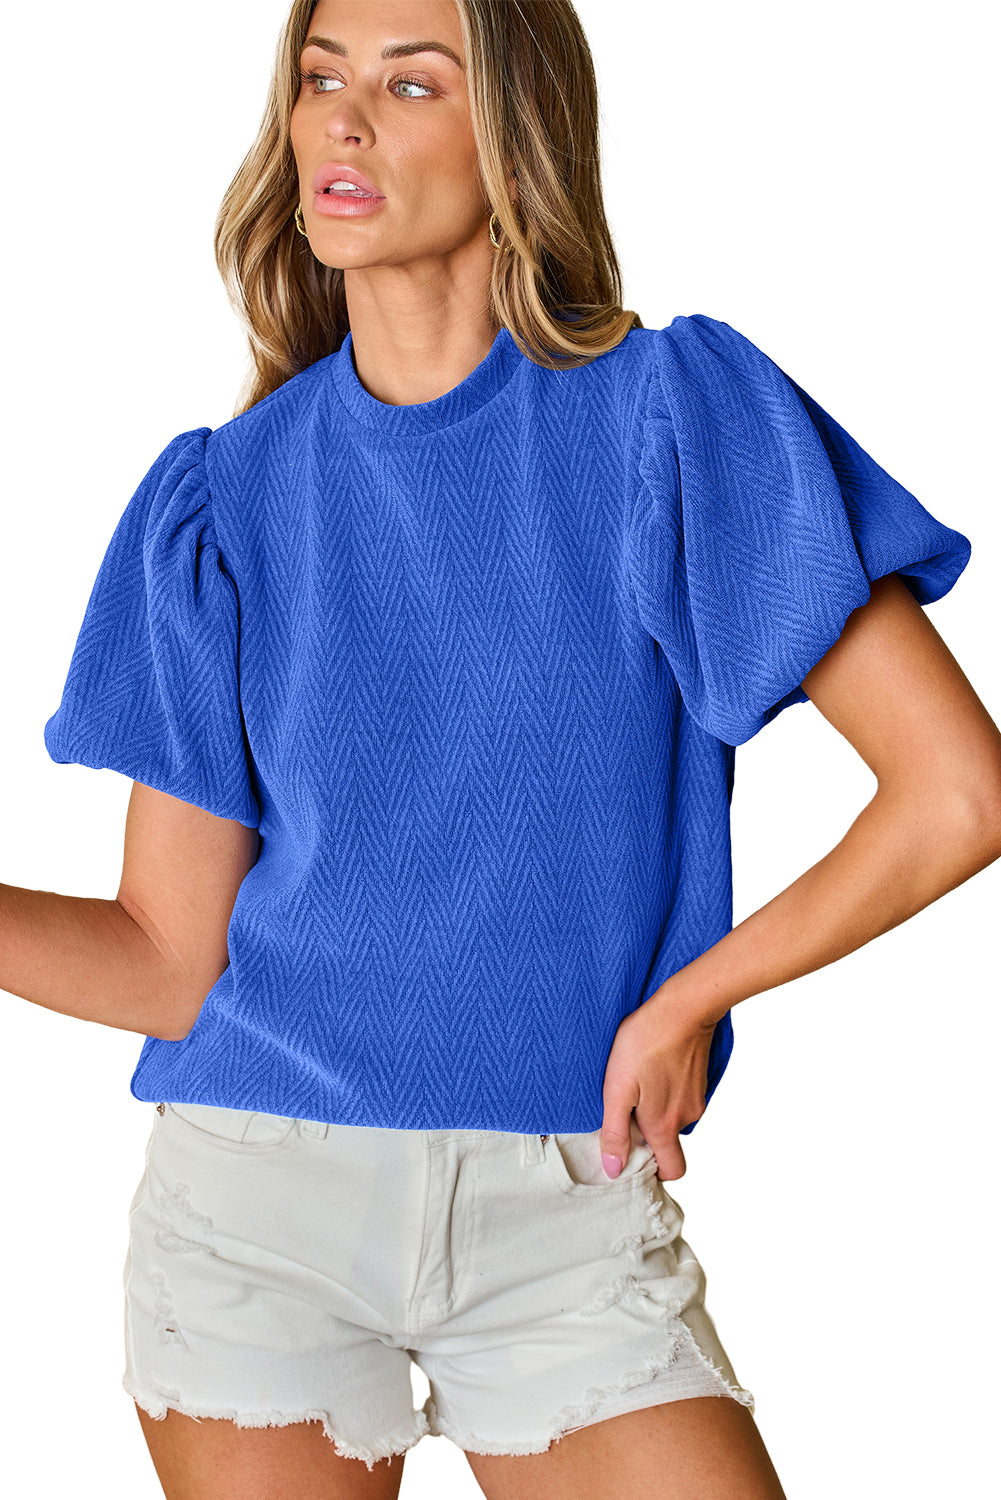 Sky Blue Solid Textured Puff Sleeve Mock Neck Blouse